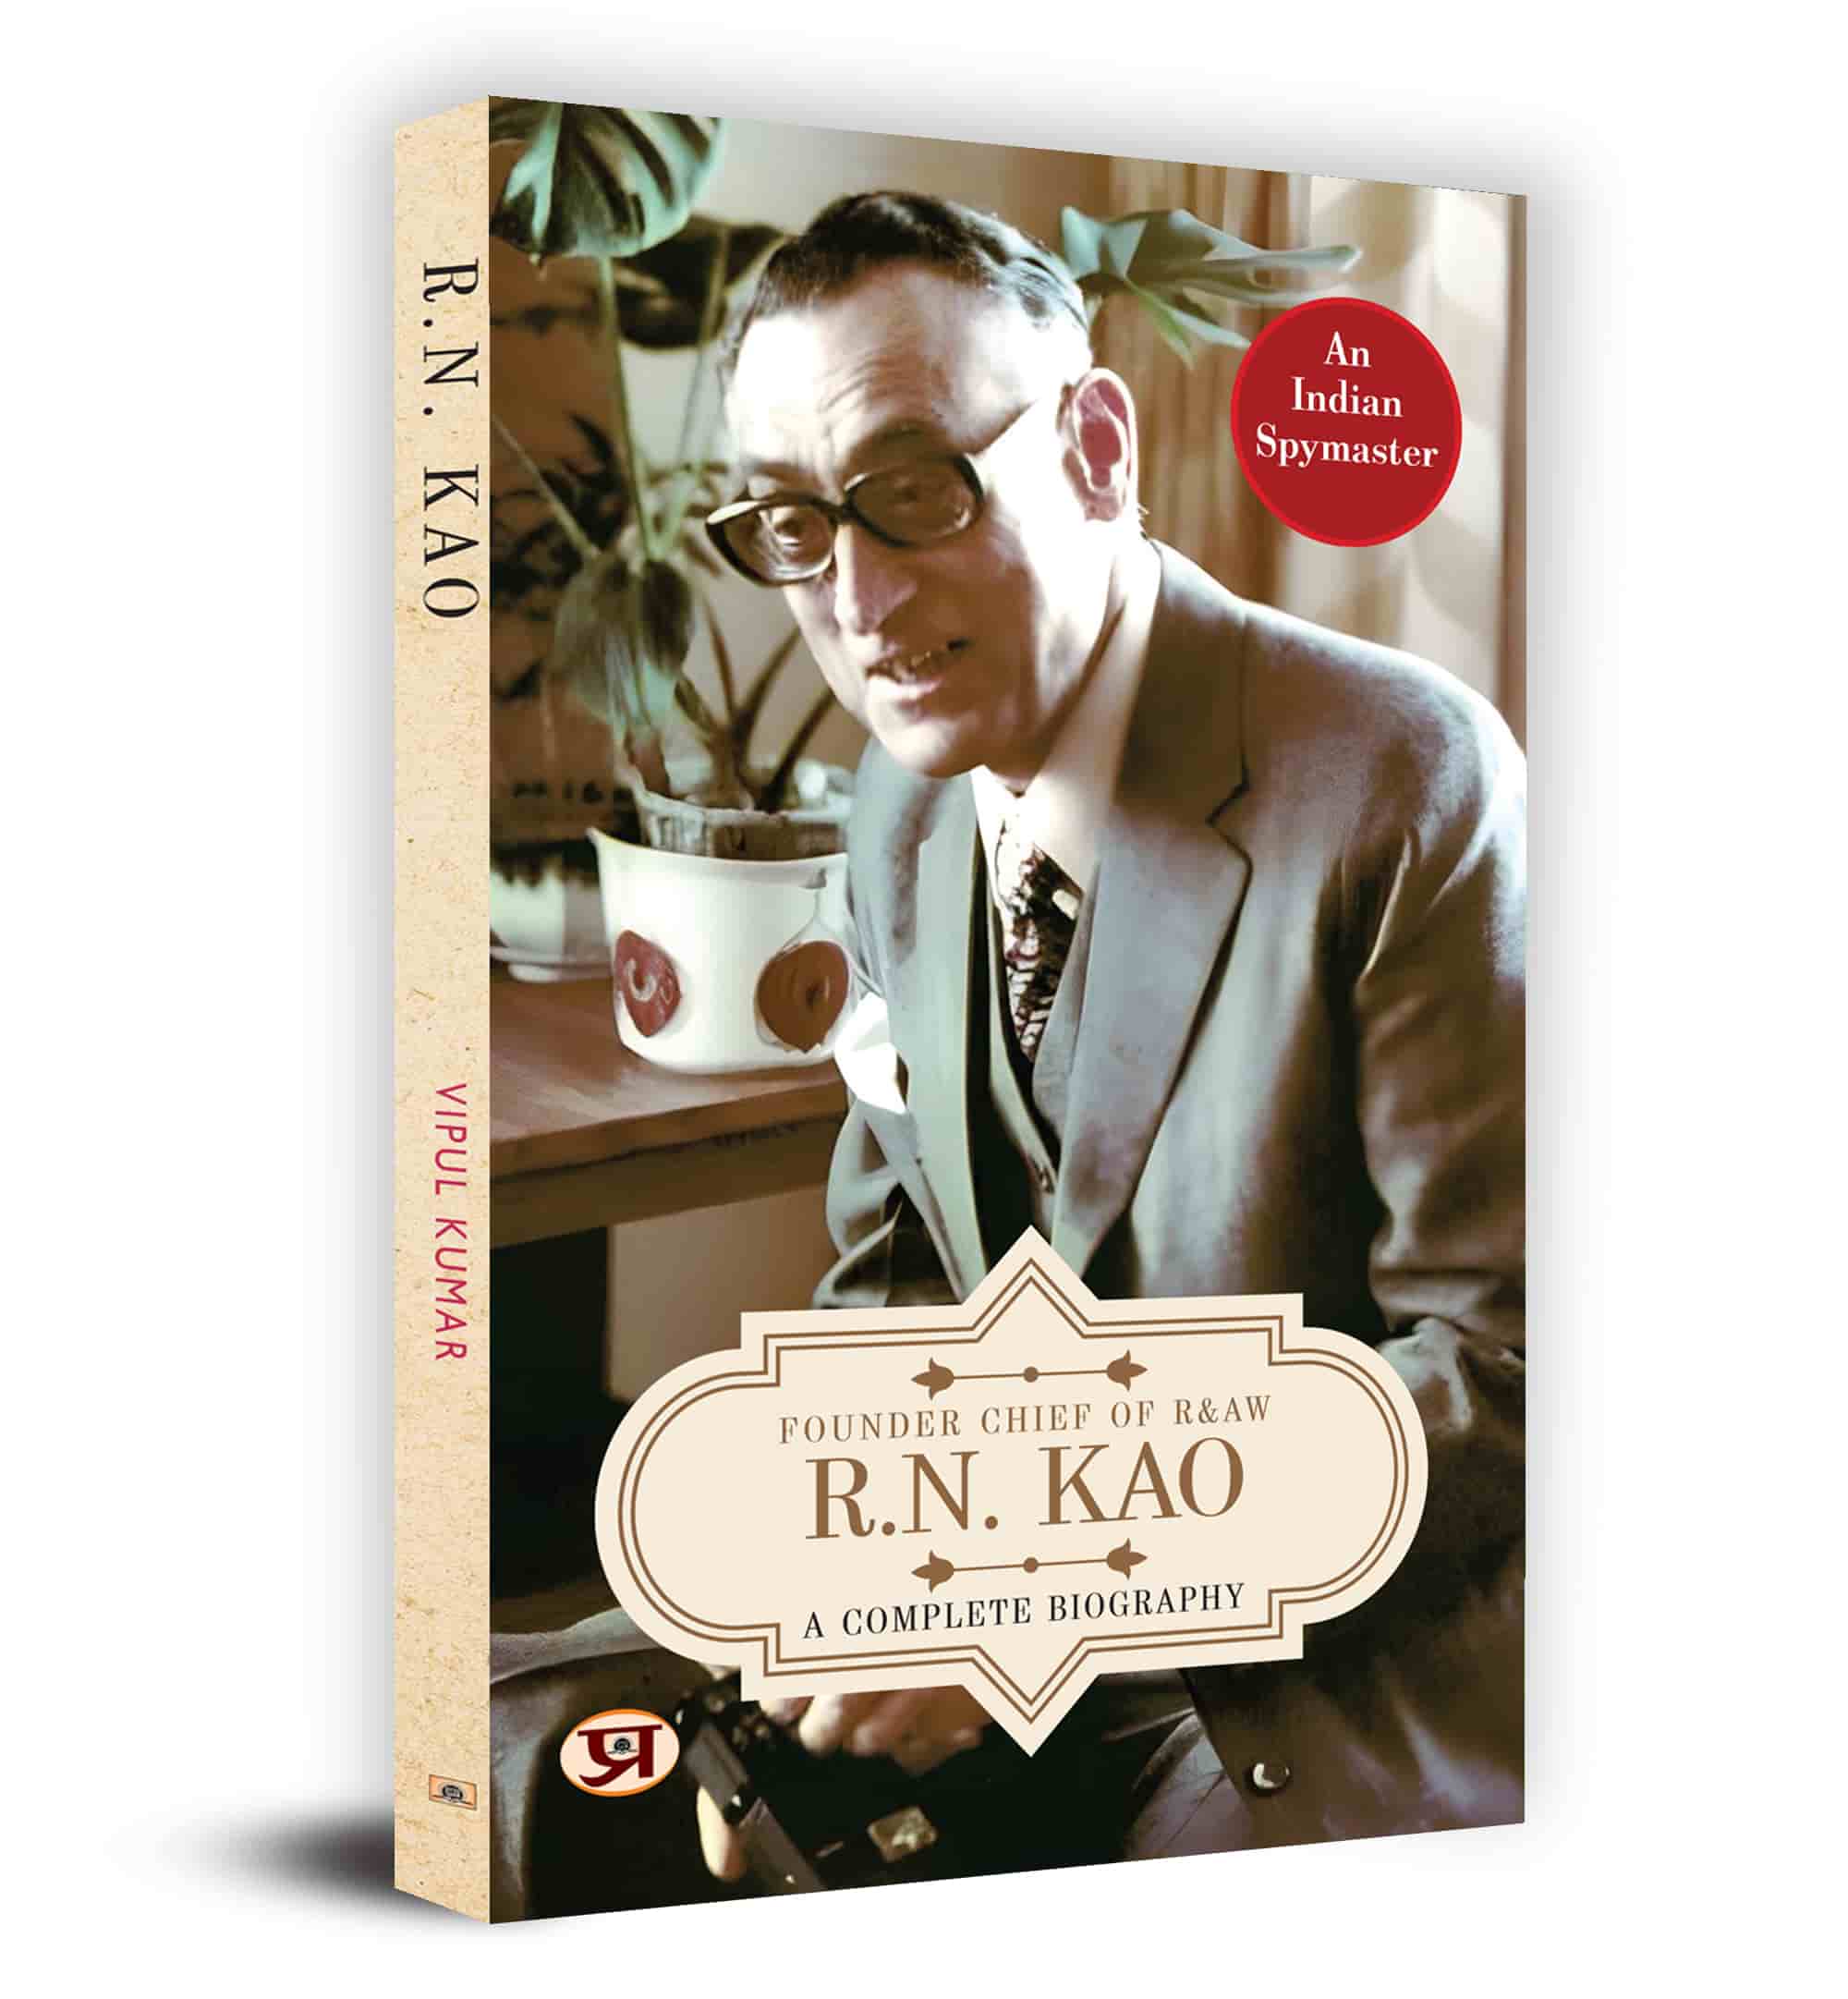 R.N. Kao: A Complete Biography - Founder Chief of R & AW